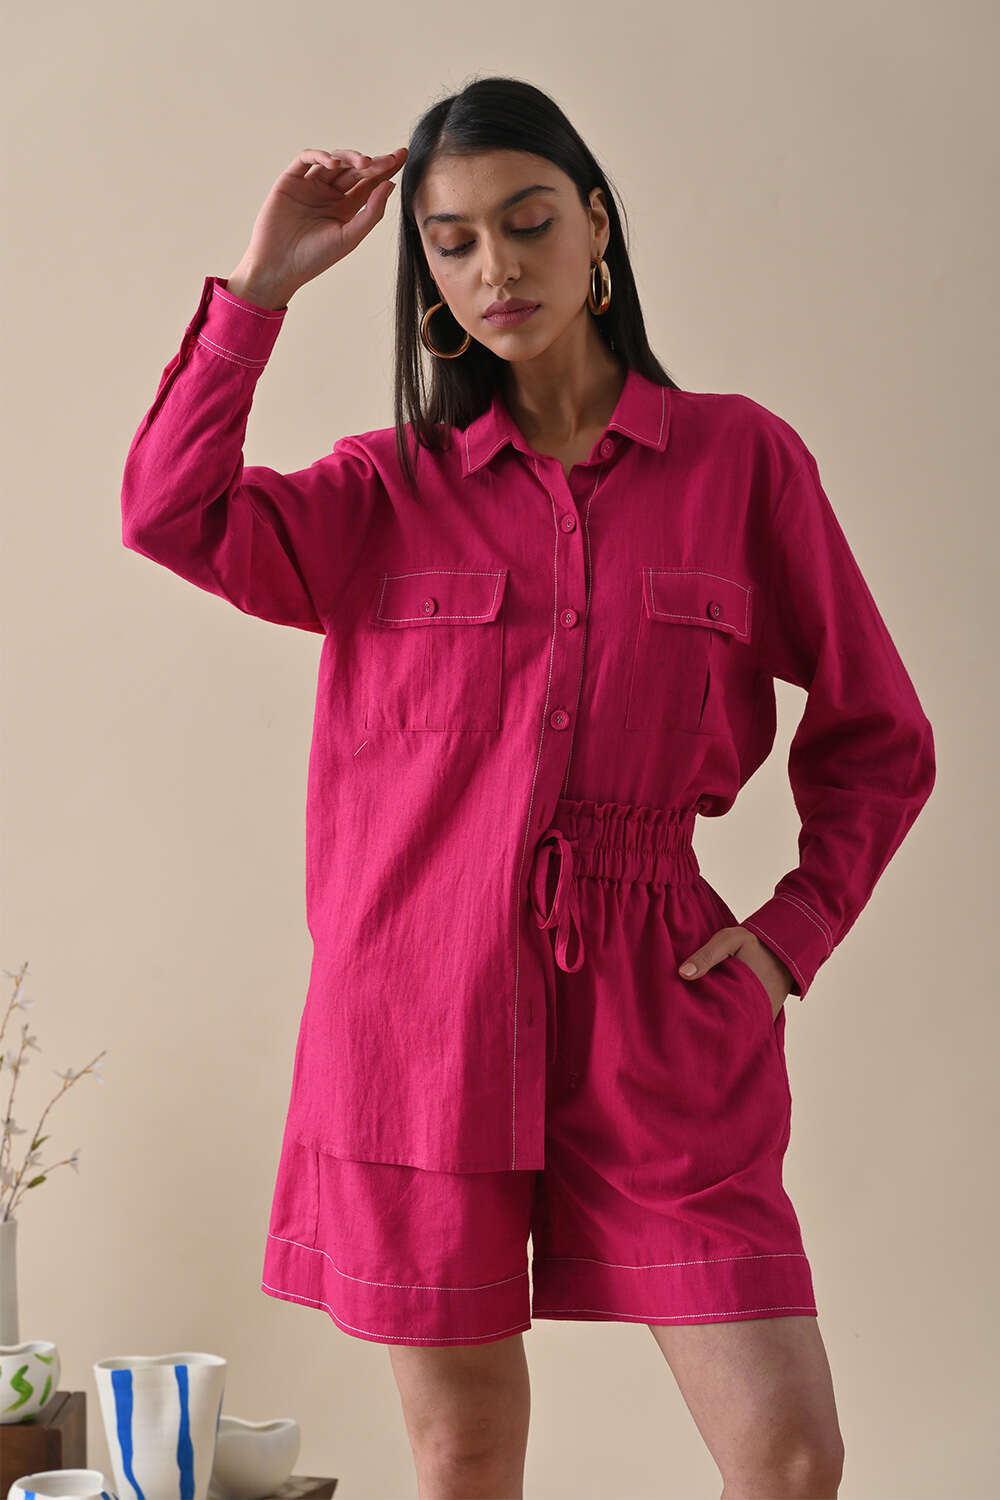 Pink Co-ord Set at Kamakhyaa by Kanelle. This item is Casual Wear, Co-ord Sets, Cotton Hemp, For Siblings, July Sale, Life in Colours, Natural with azo dyes, Pink, Relaxed Fit, Short Sets, Solids, Travel, Travel Co-ords, Womenswear